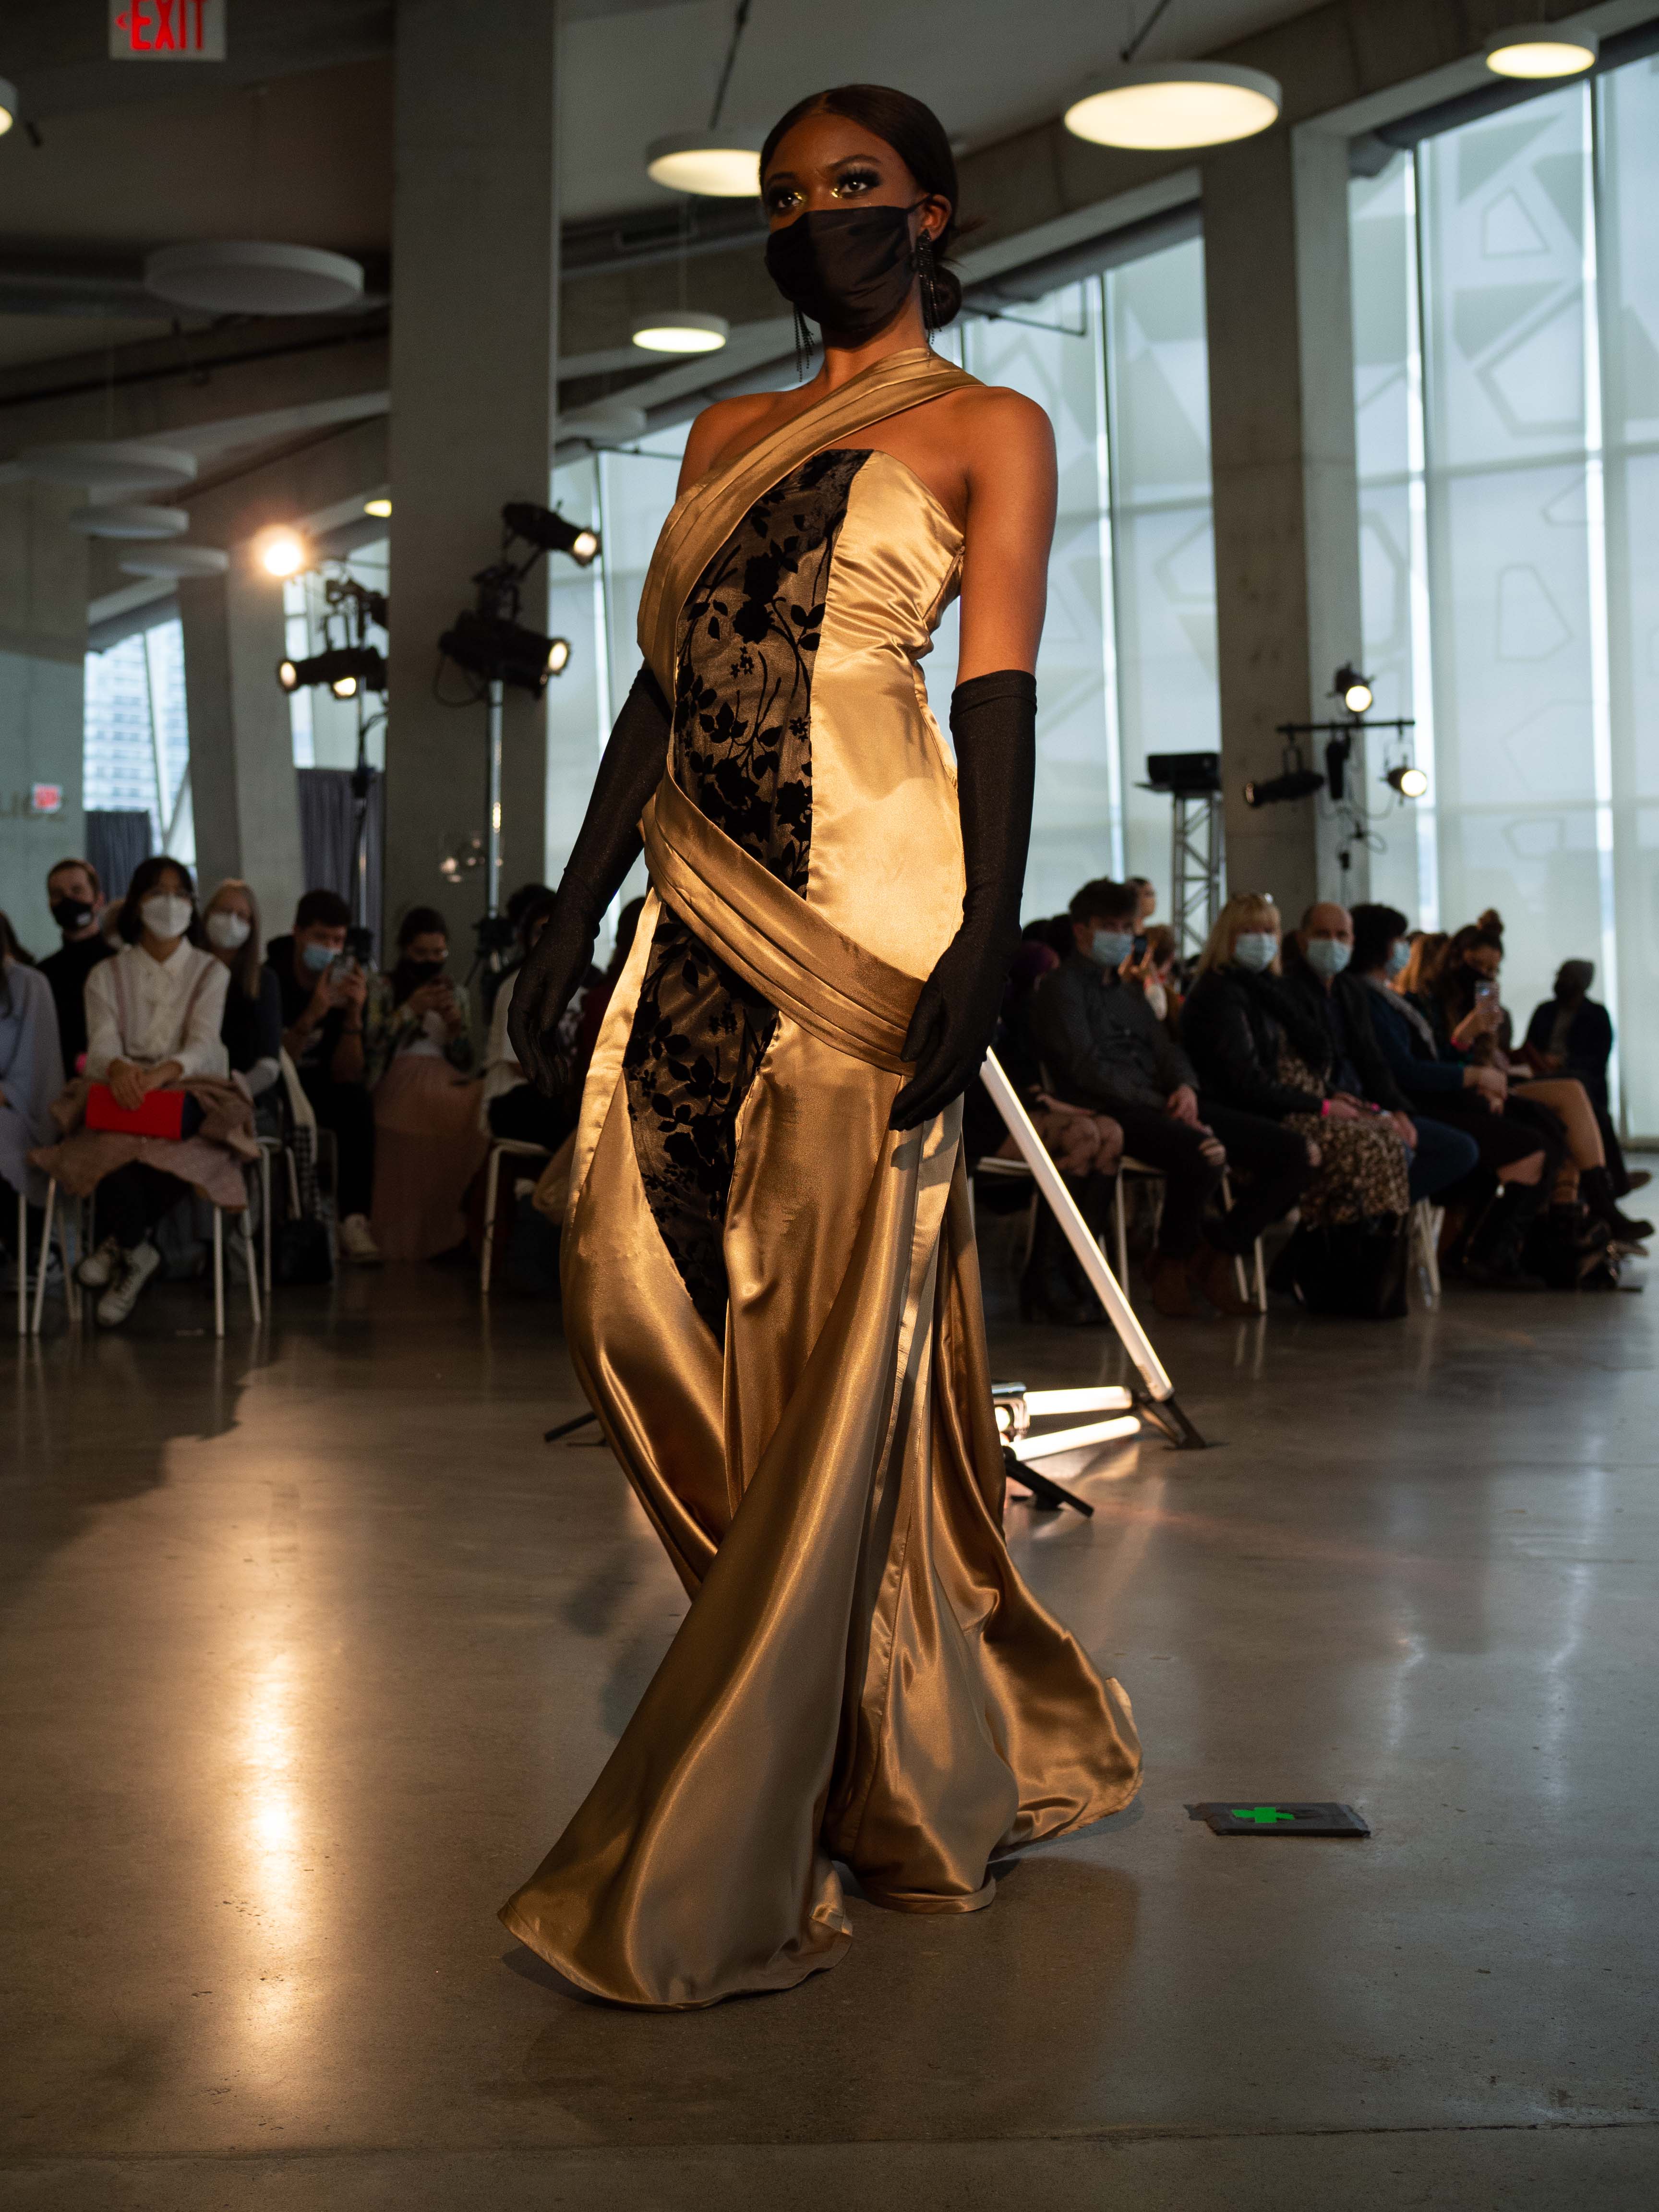 A model on the runway wearing a piece from Havana Rodriguez Castro's collection